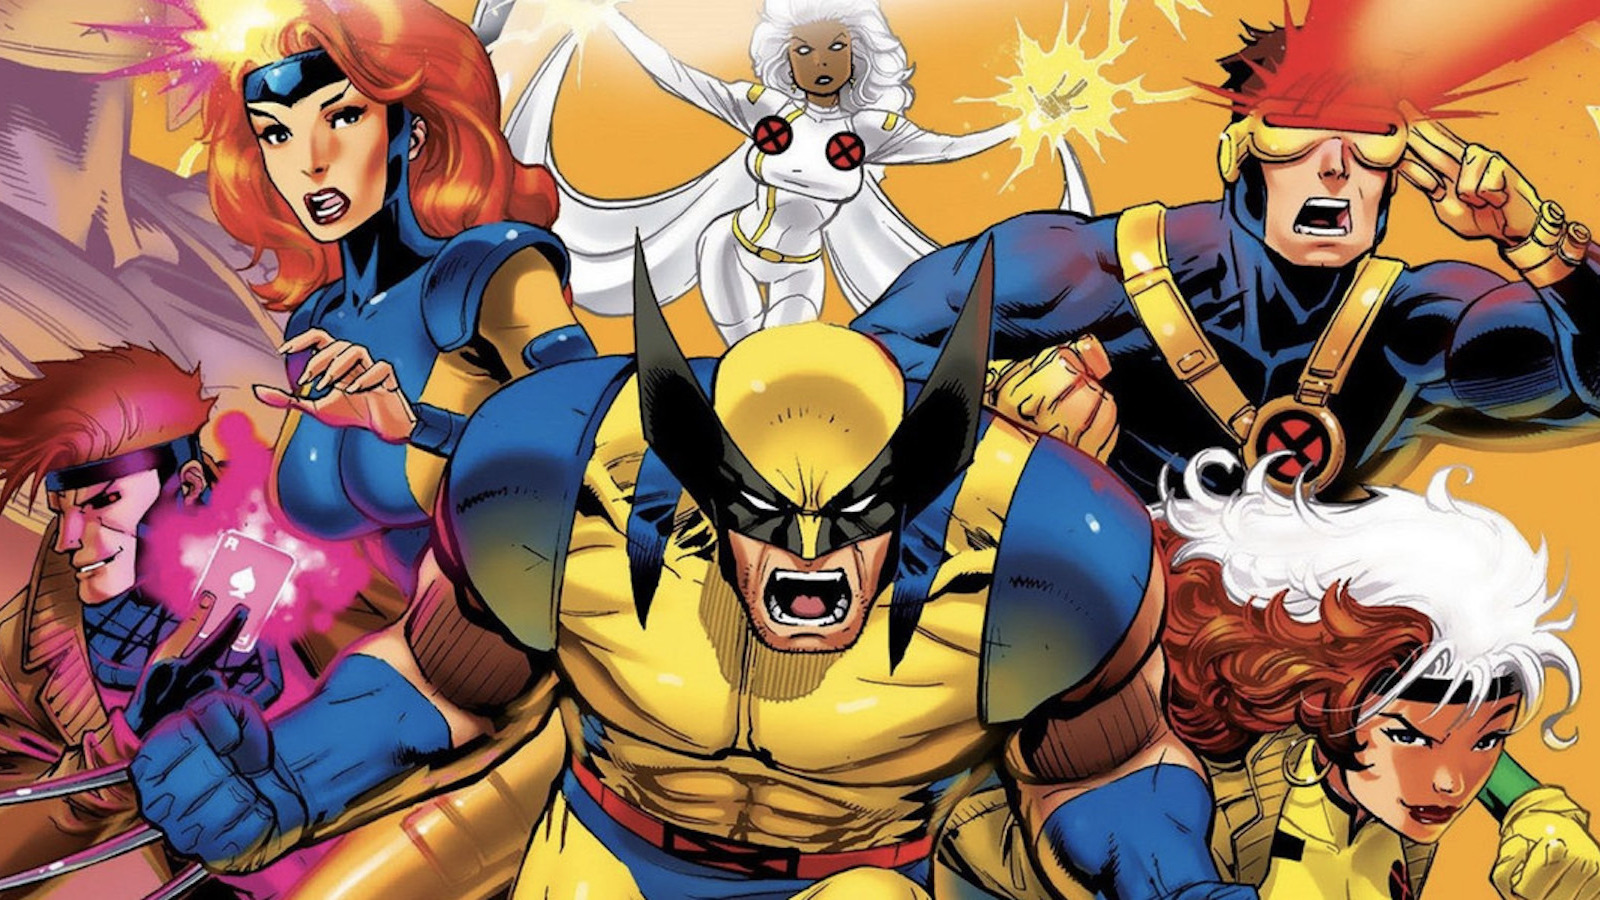 Everything We Know About X-Men '97 So Far